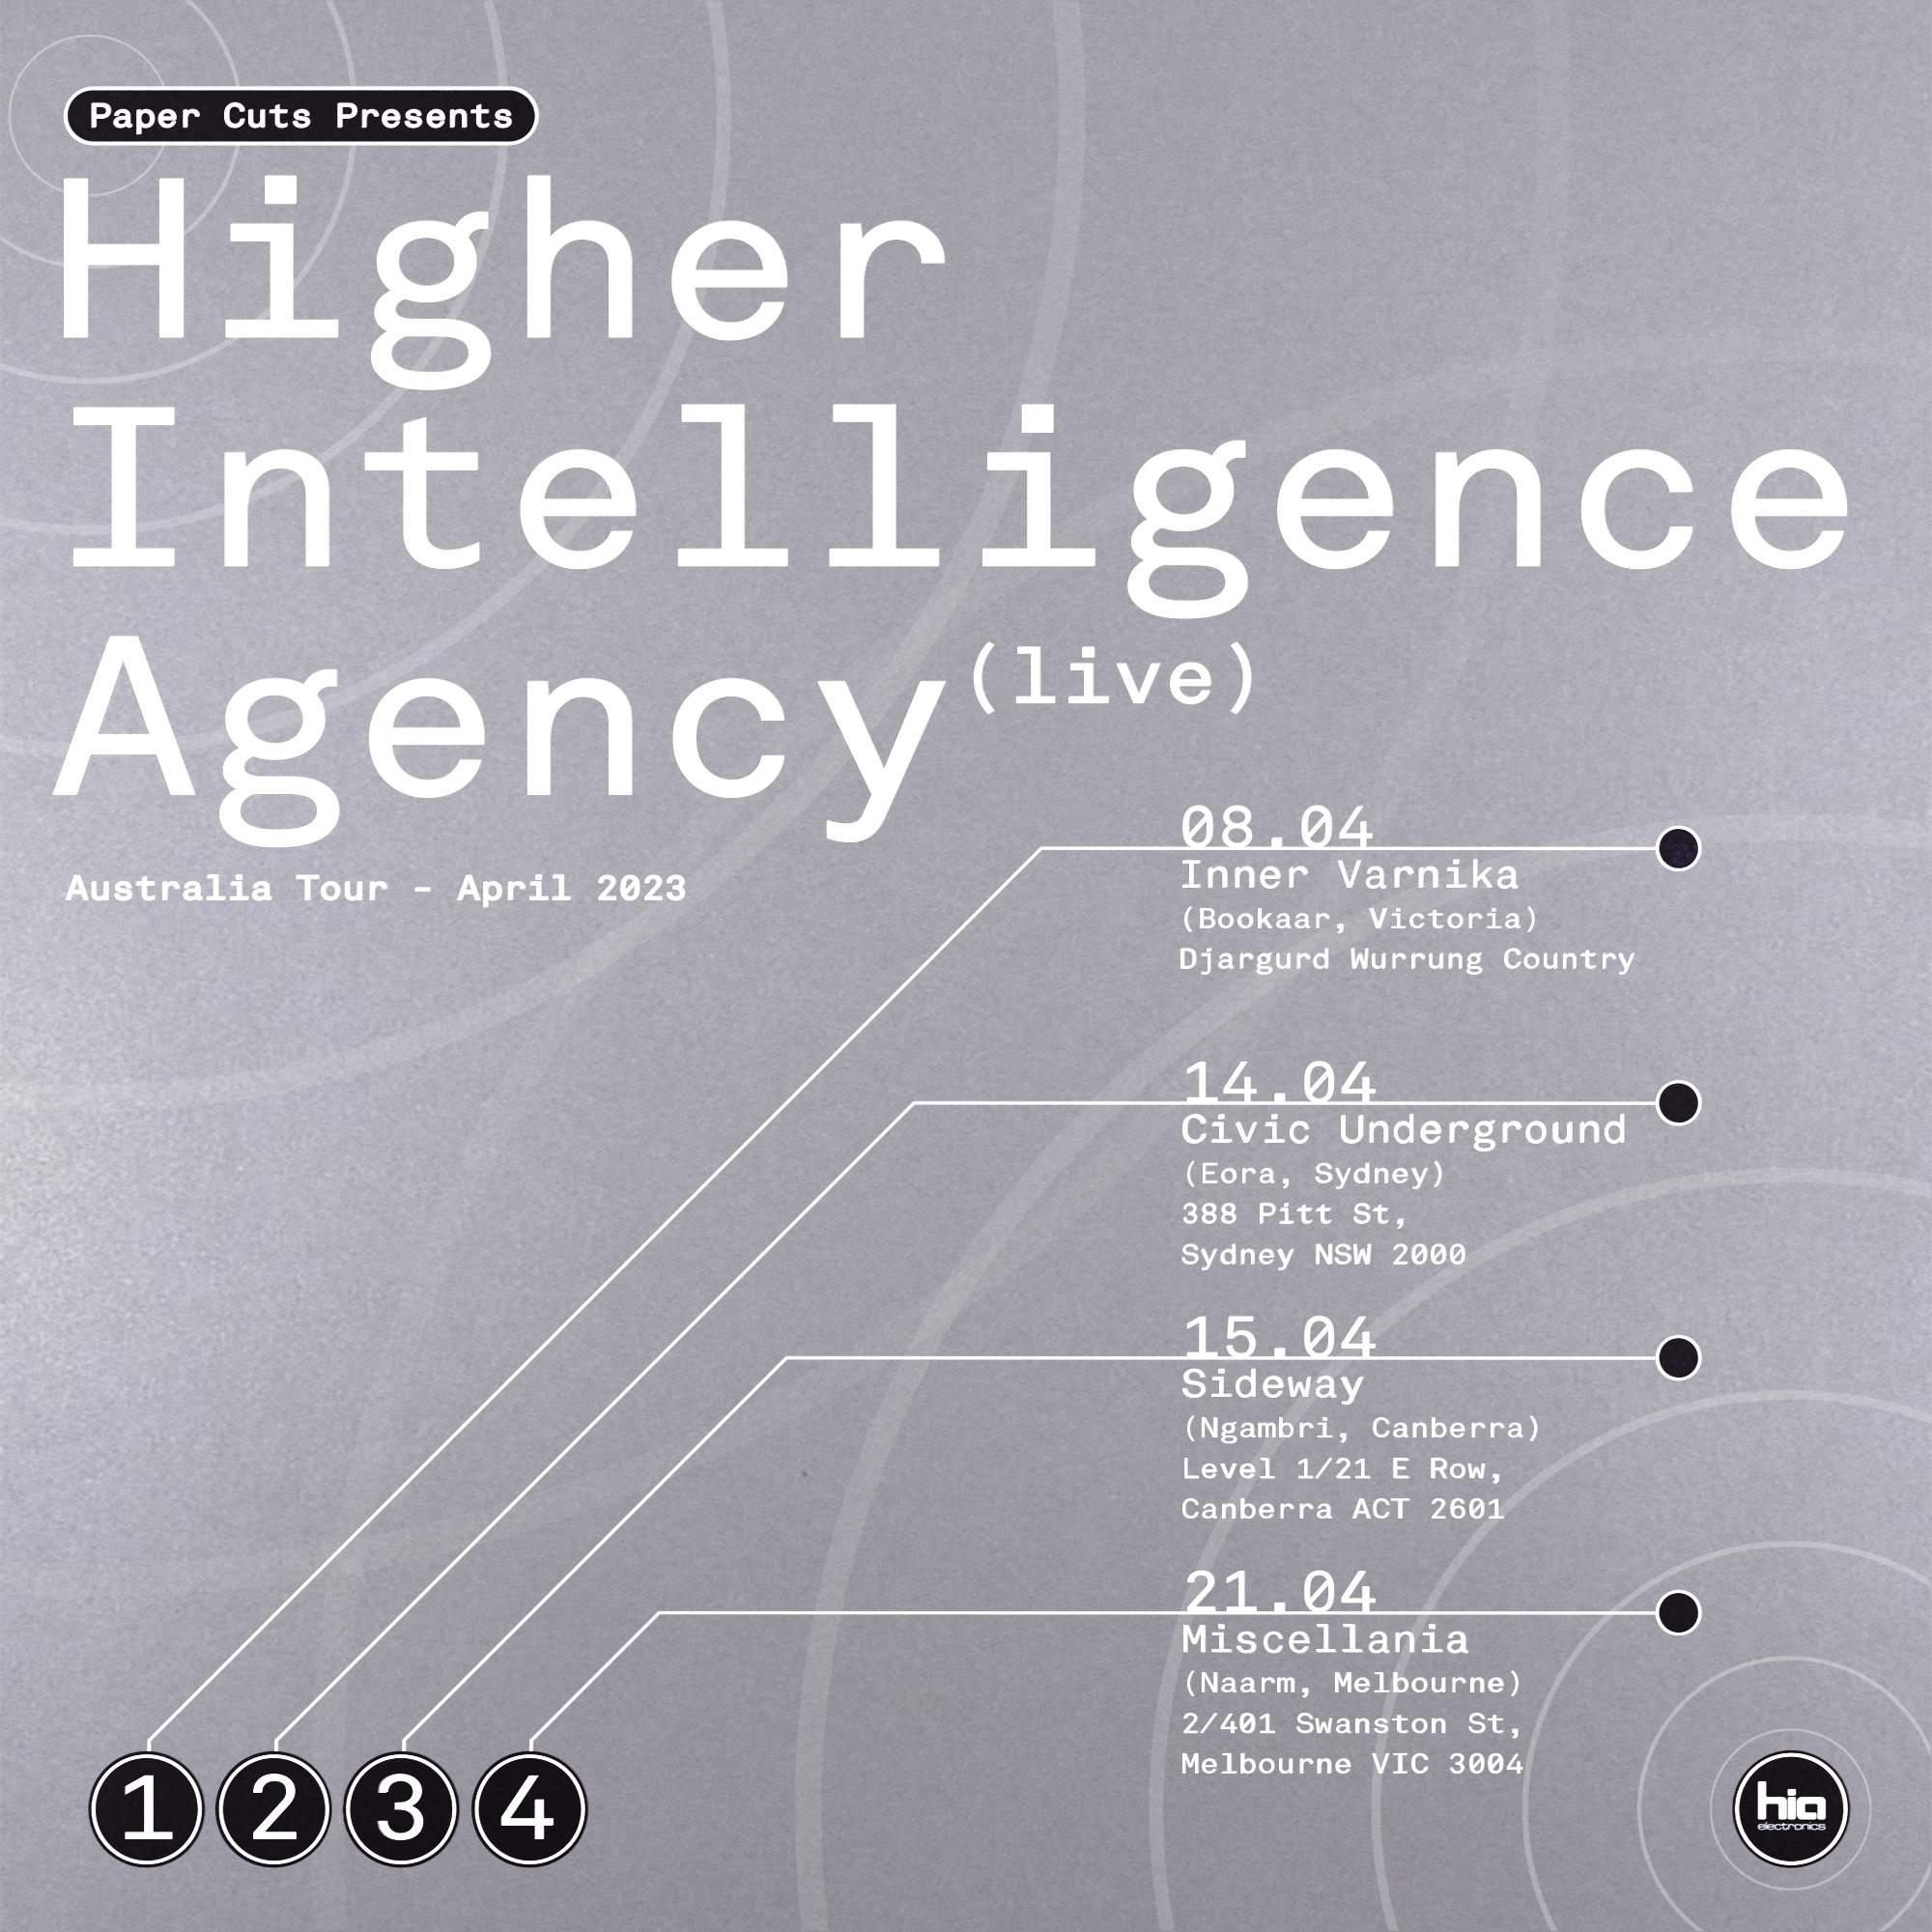 Circuit Benders x Paper-Cuts presents Higher Intelligence Agency (Live / Sideway) - フライヤー裏